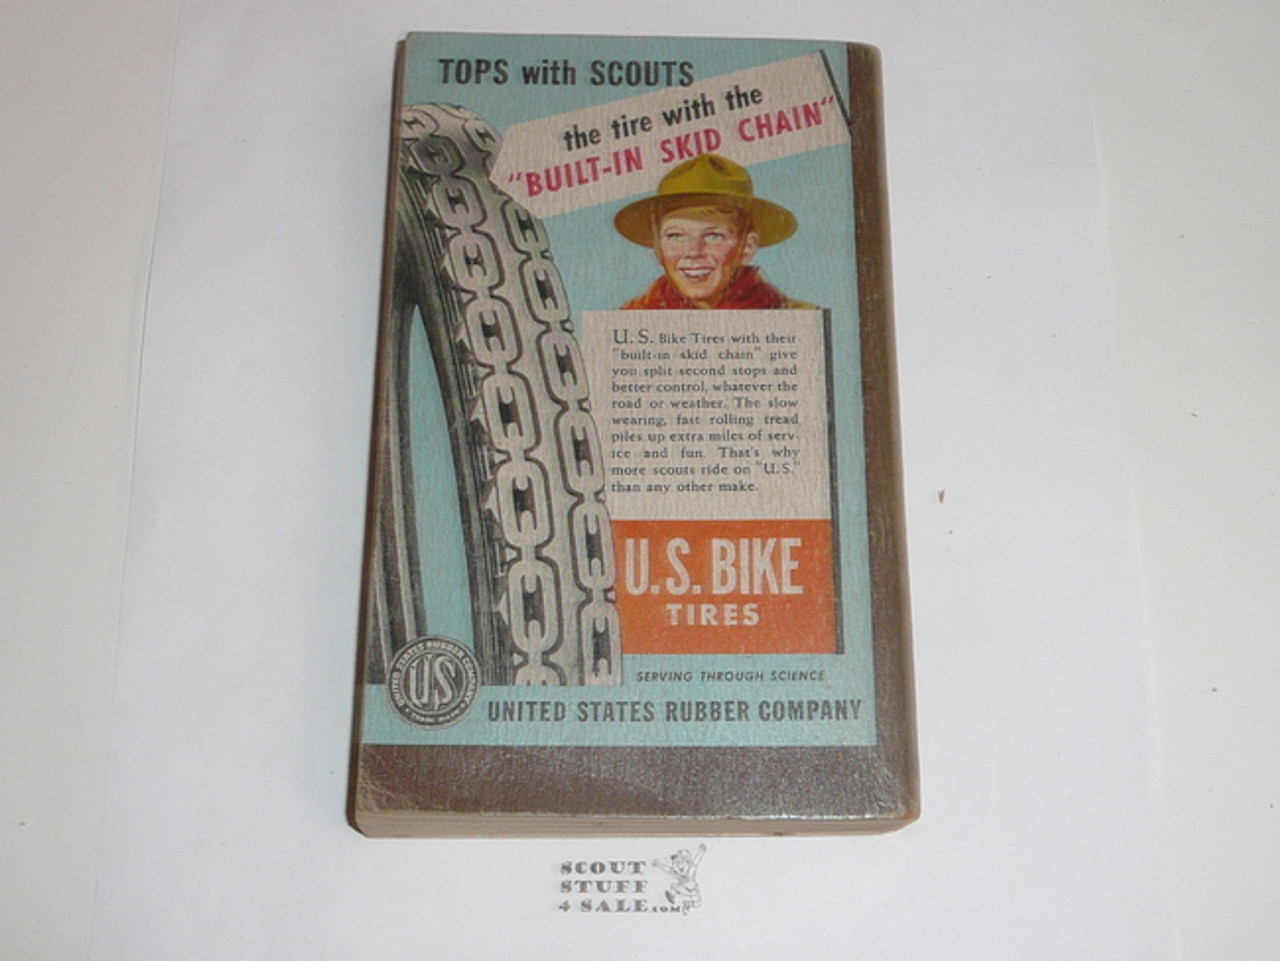 1948 Boy Scout Handbook, Fifth Edition, First Printing, Don Ross Cover Artwork, very good condition, two stars on last page